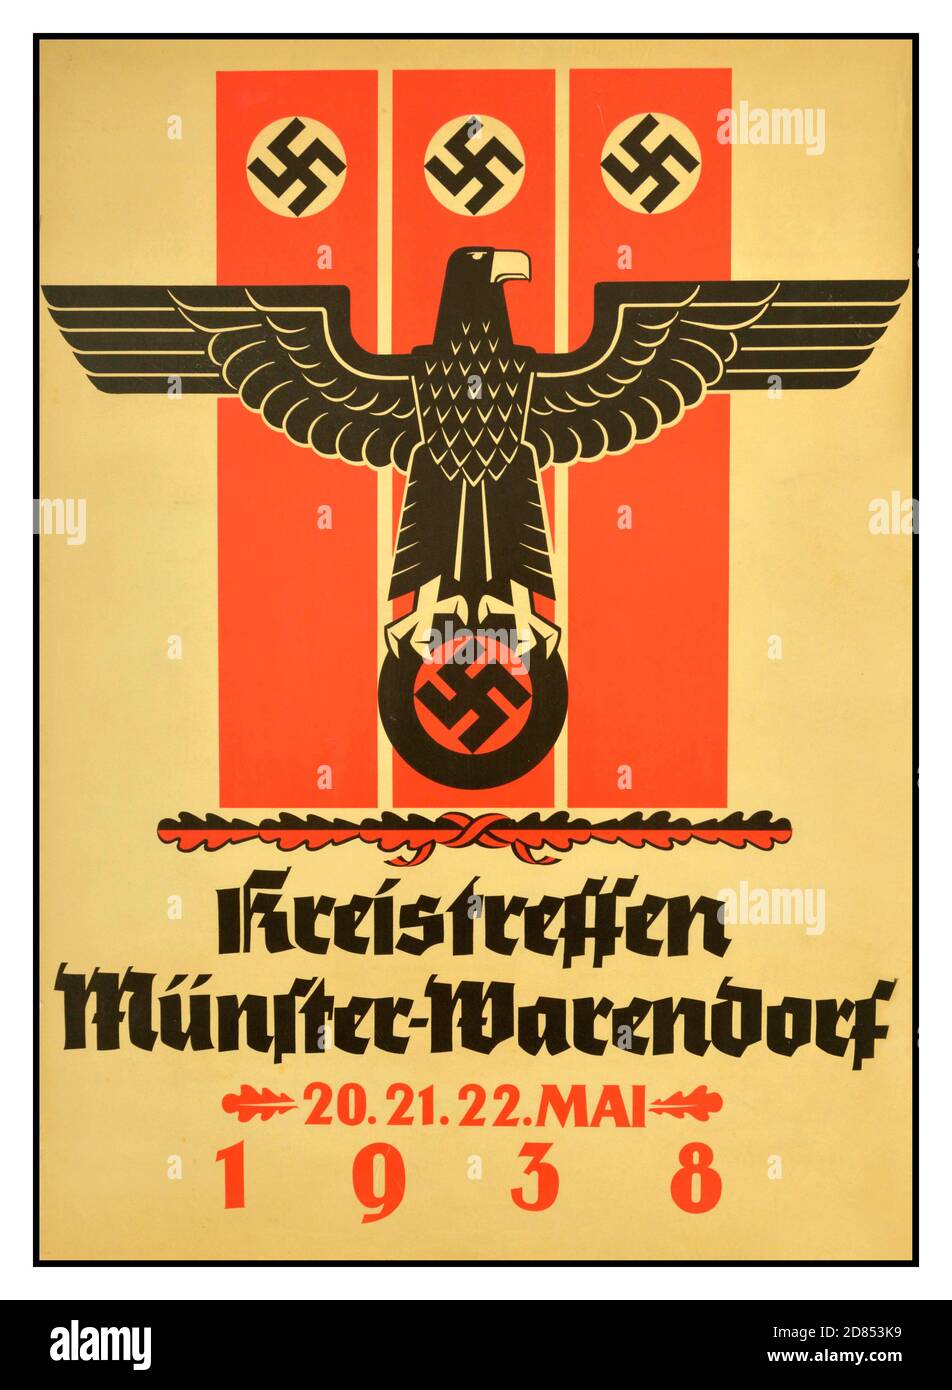 Vintage 1930's Nazi propaganda poster issued  Nazi Germany - NSDAP-Kreistreffen in Munster-Warendorf - 20- 22.05.1938 - NSDAP meeting in Munster-Warendorf. 20-22 May 1938. Image of a Nazi eagle holding a swastika. The National Socialist German Workers' Party (abbreviated in German as NSDAP), commonly referred to in English as the Nazi Party, was a far-right political party in Germany that was active between 1920 and 1945, that created and supported the ideology of National Socialism. Its precursor, the German Workers' Party (Deutsche Arbeiterpartei; DAP), existed from 1919 to 1920. Stock Photo